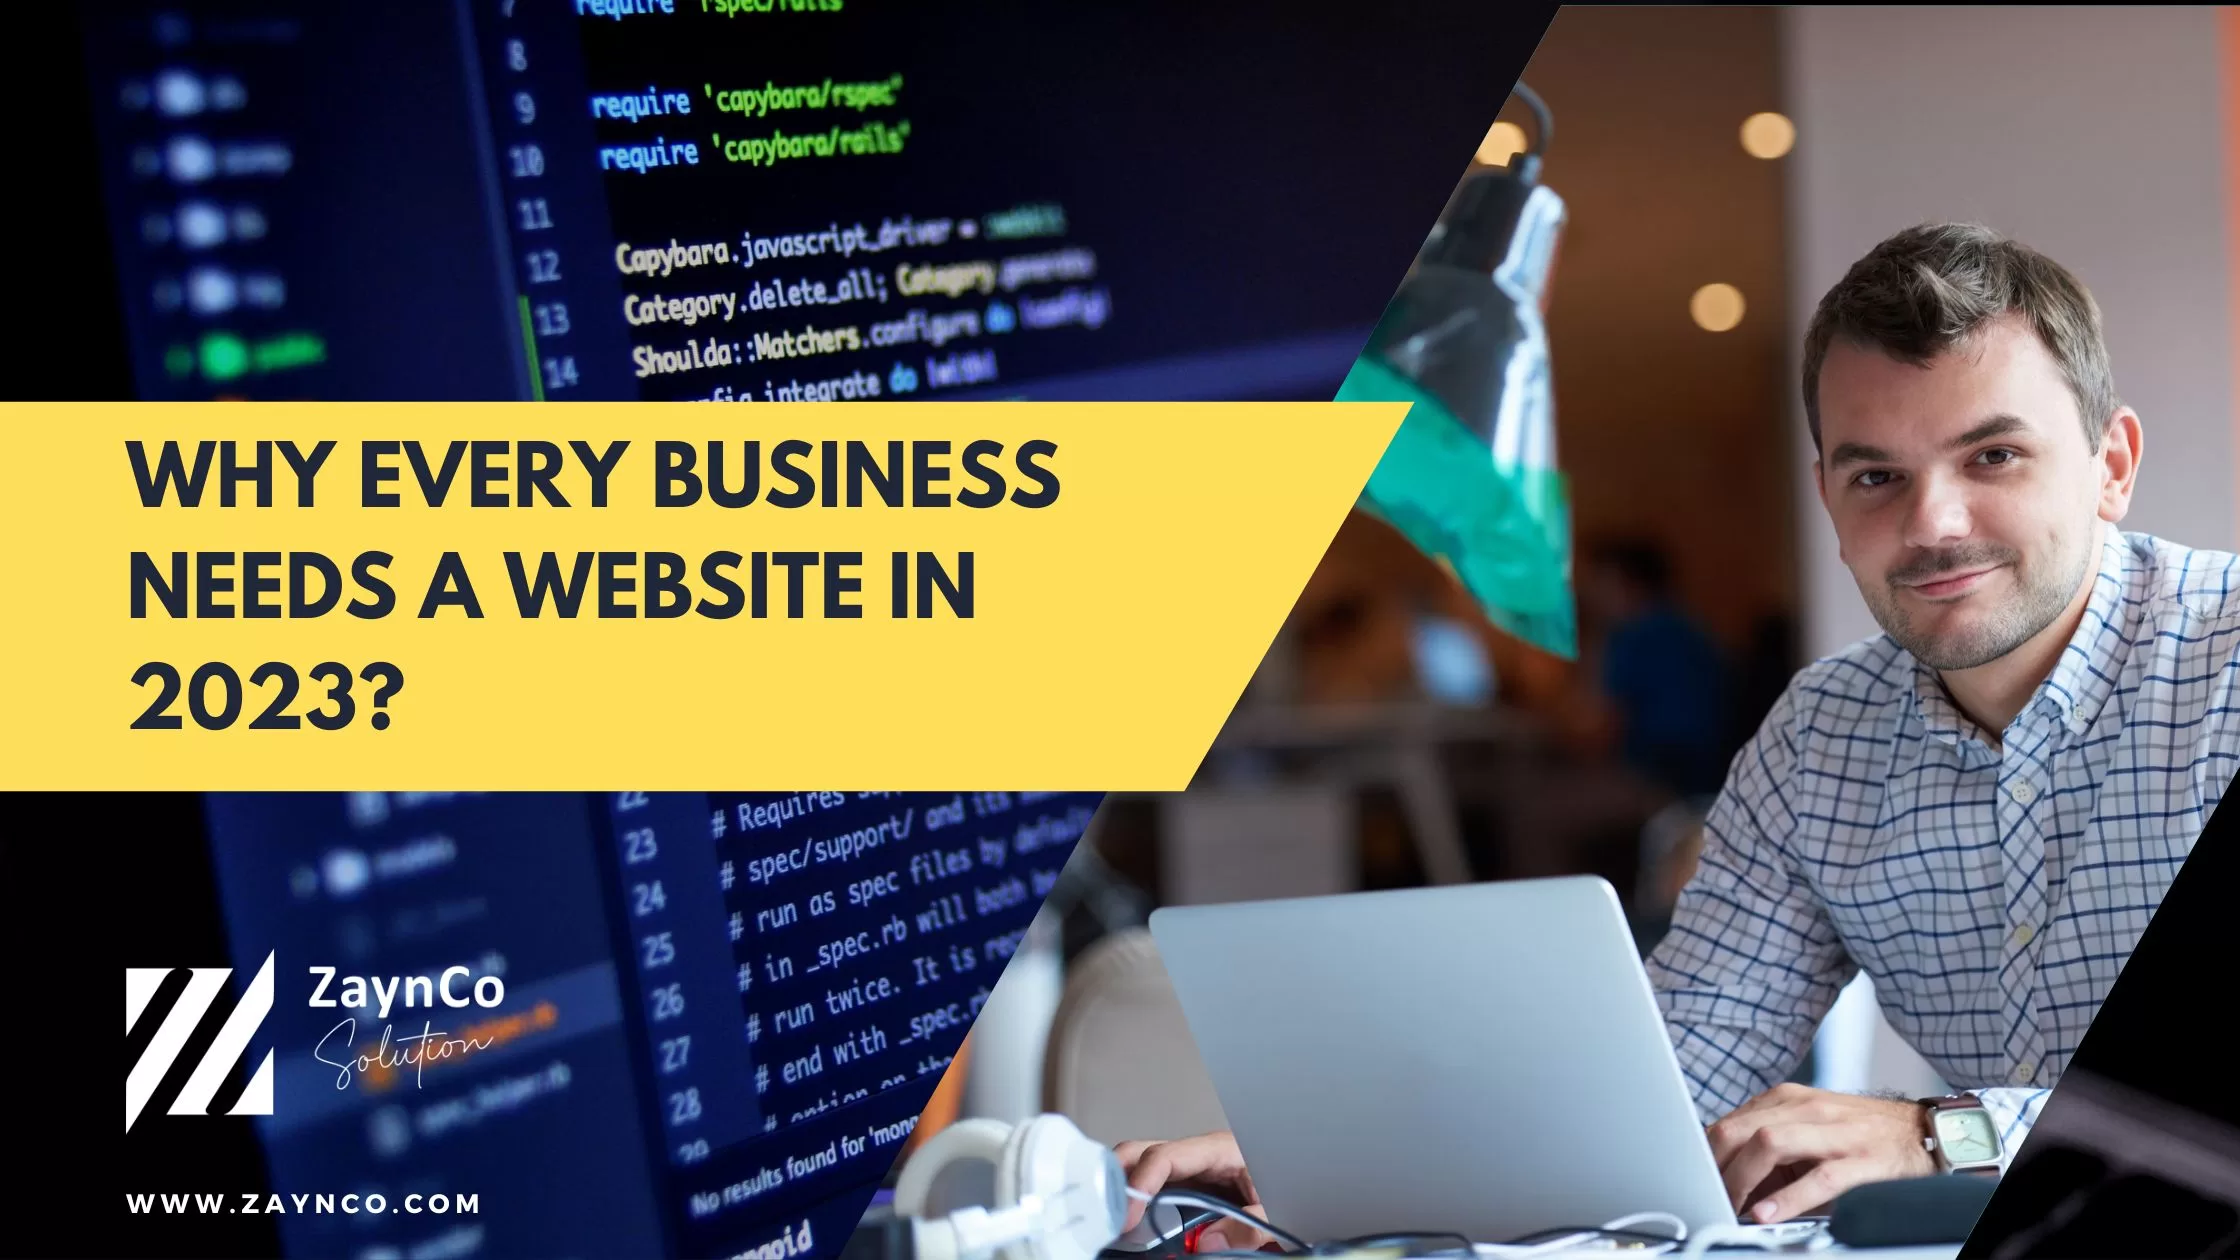 Why every business needs a website in 2023